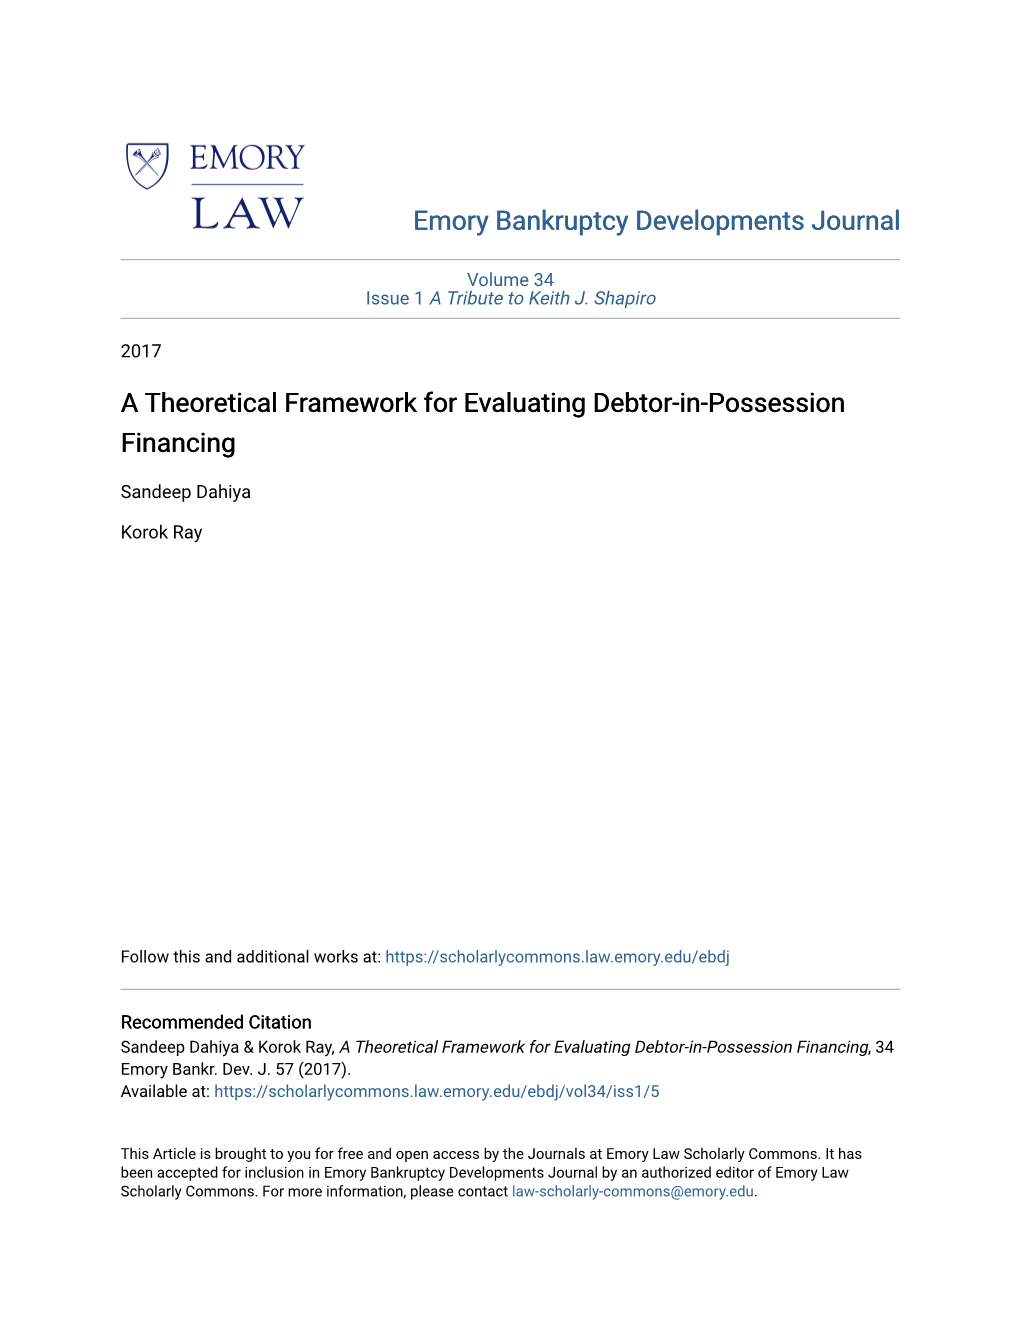 A Theoretical Framework for Evaluating Debtor-In-Possession Financing